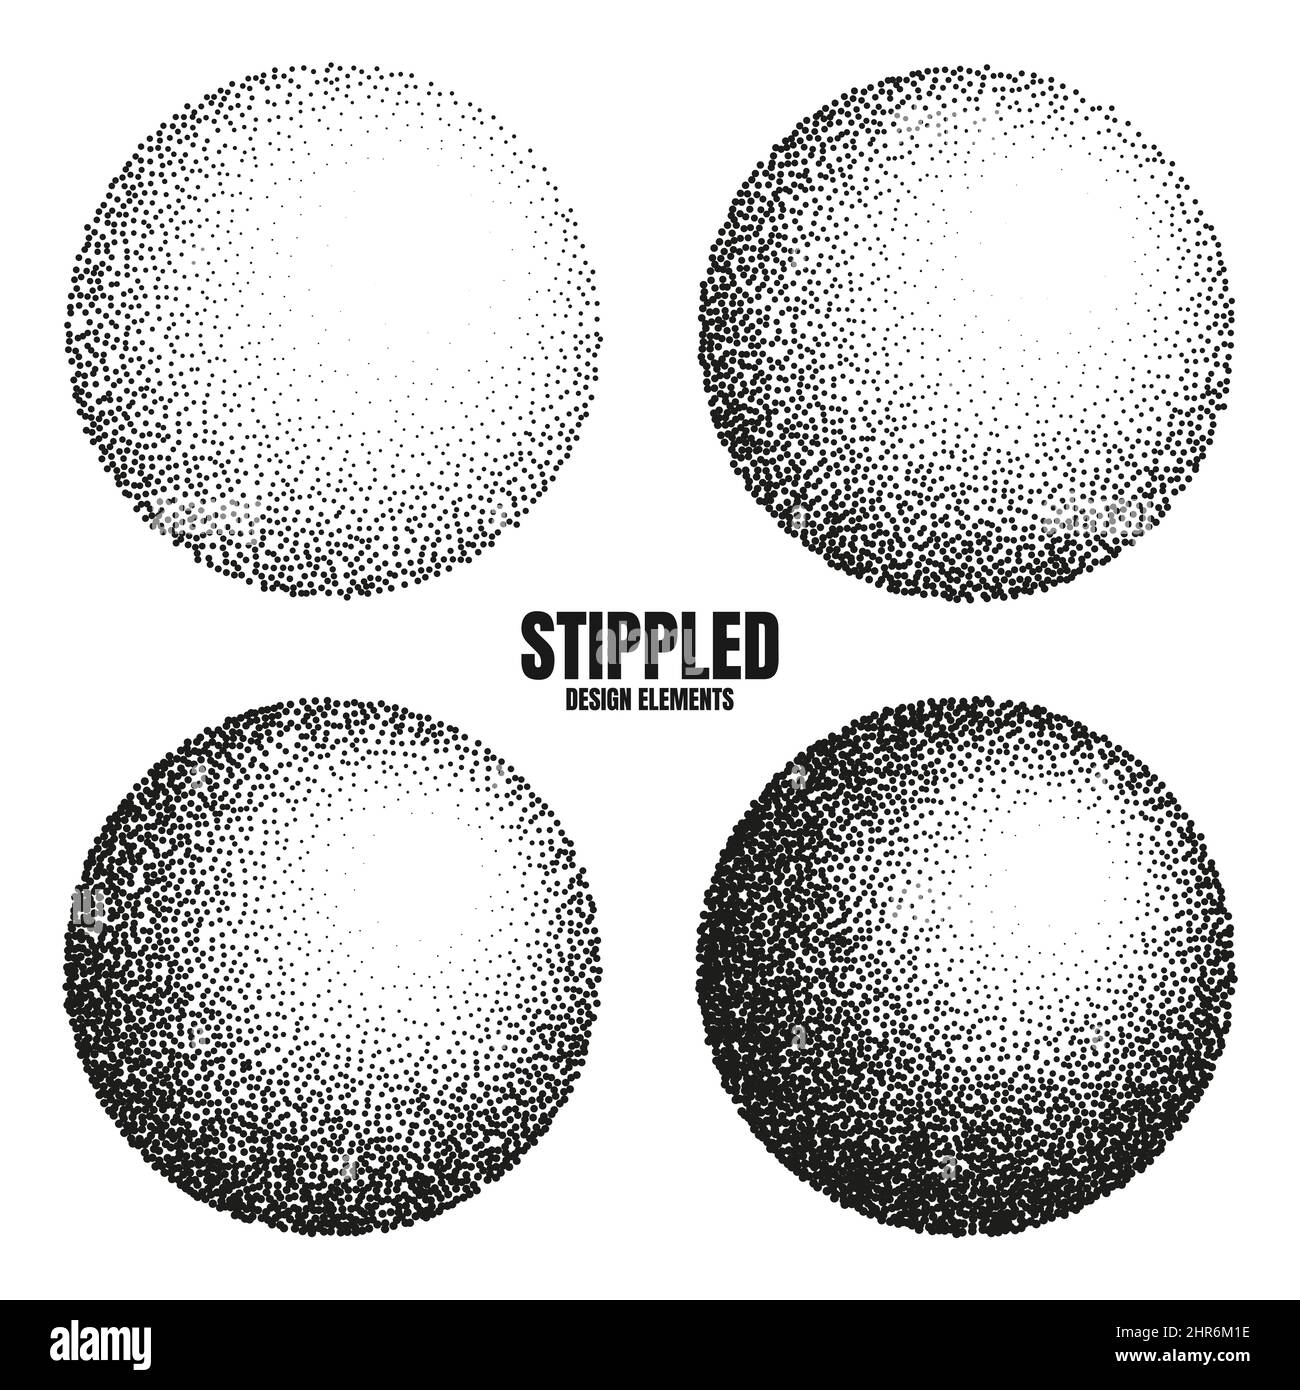 Round shaped dotted objects, stipple elements. Fading gradient